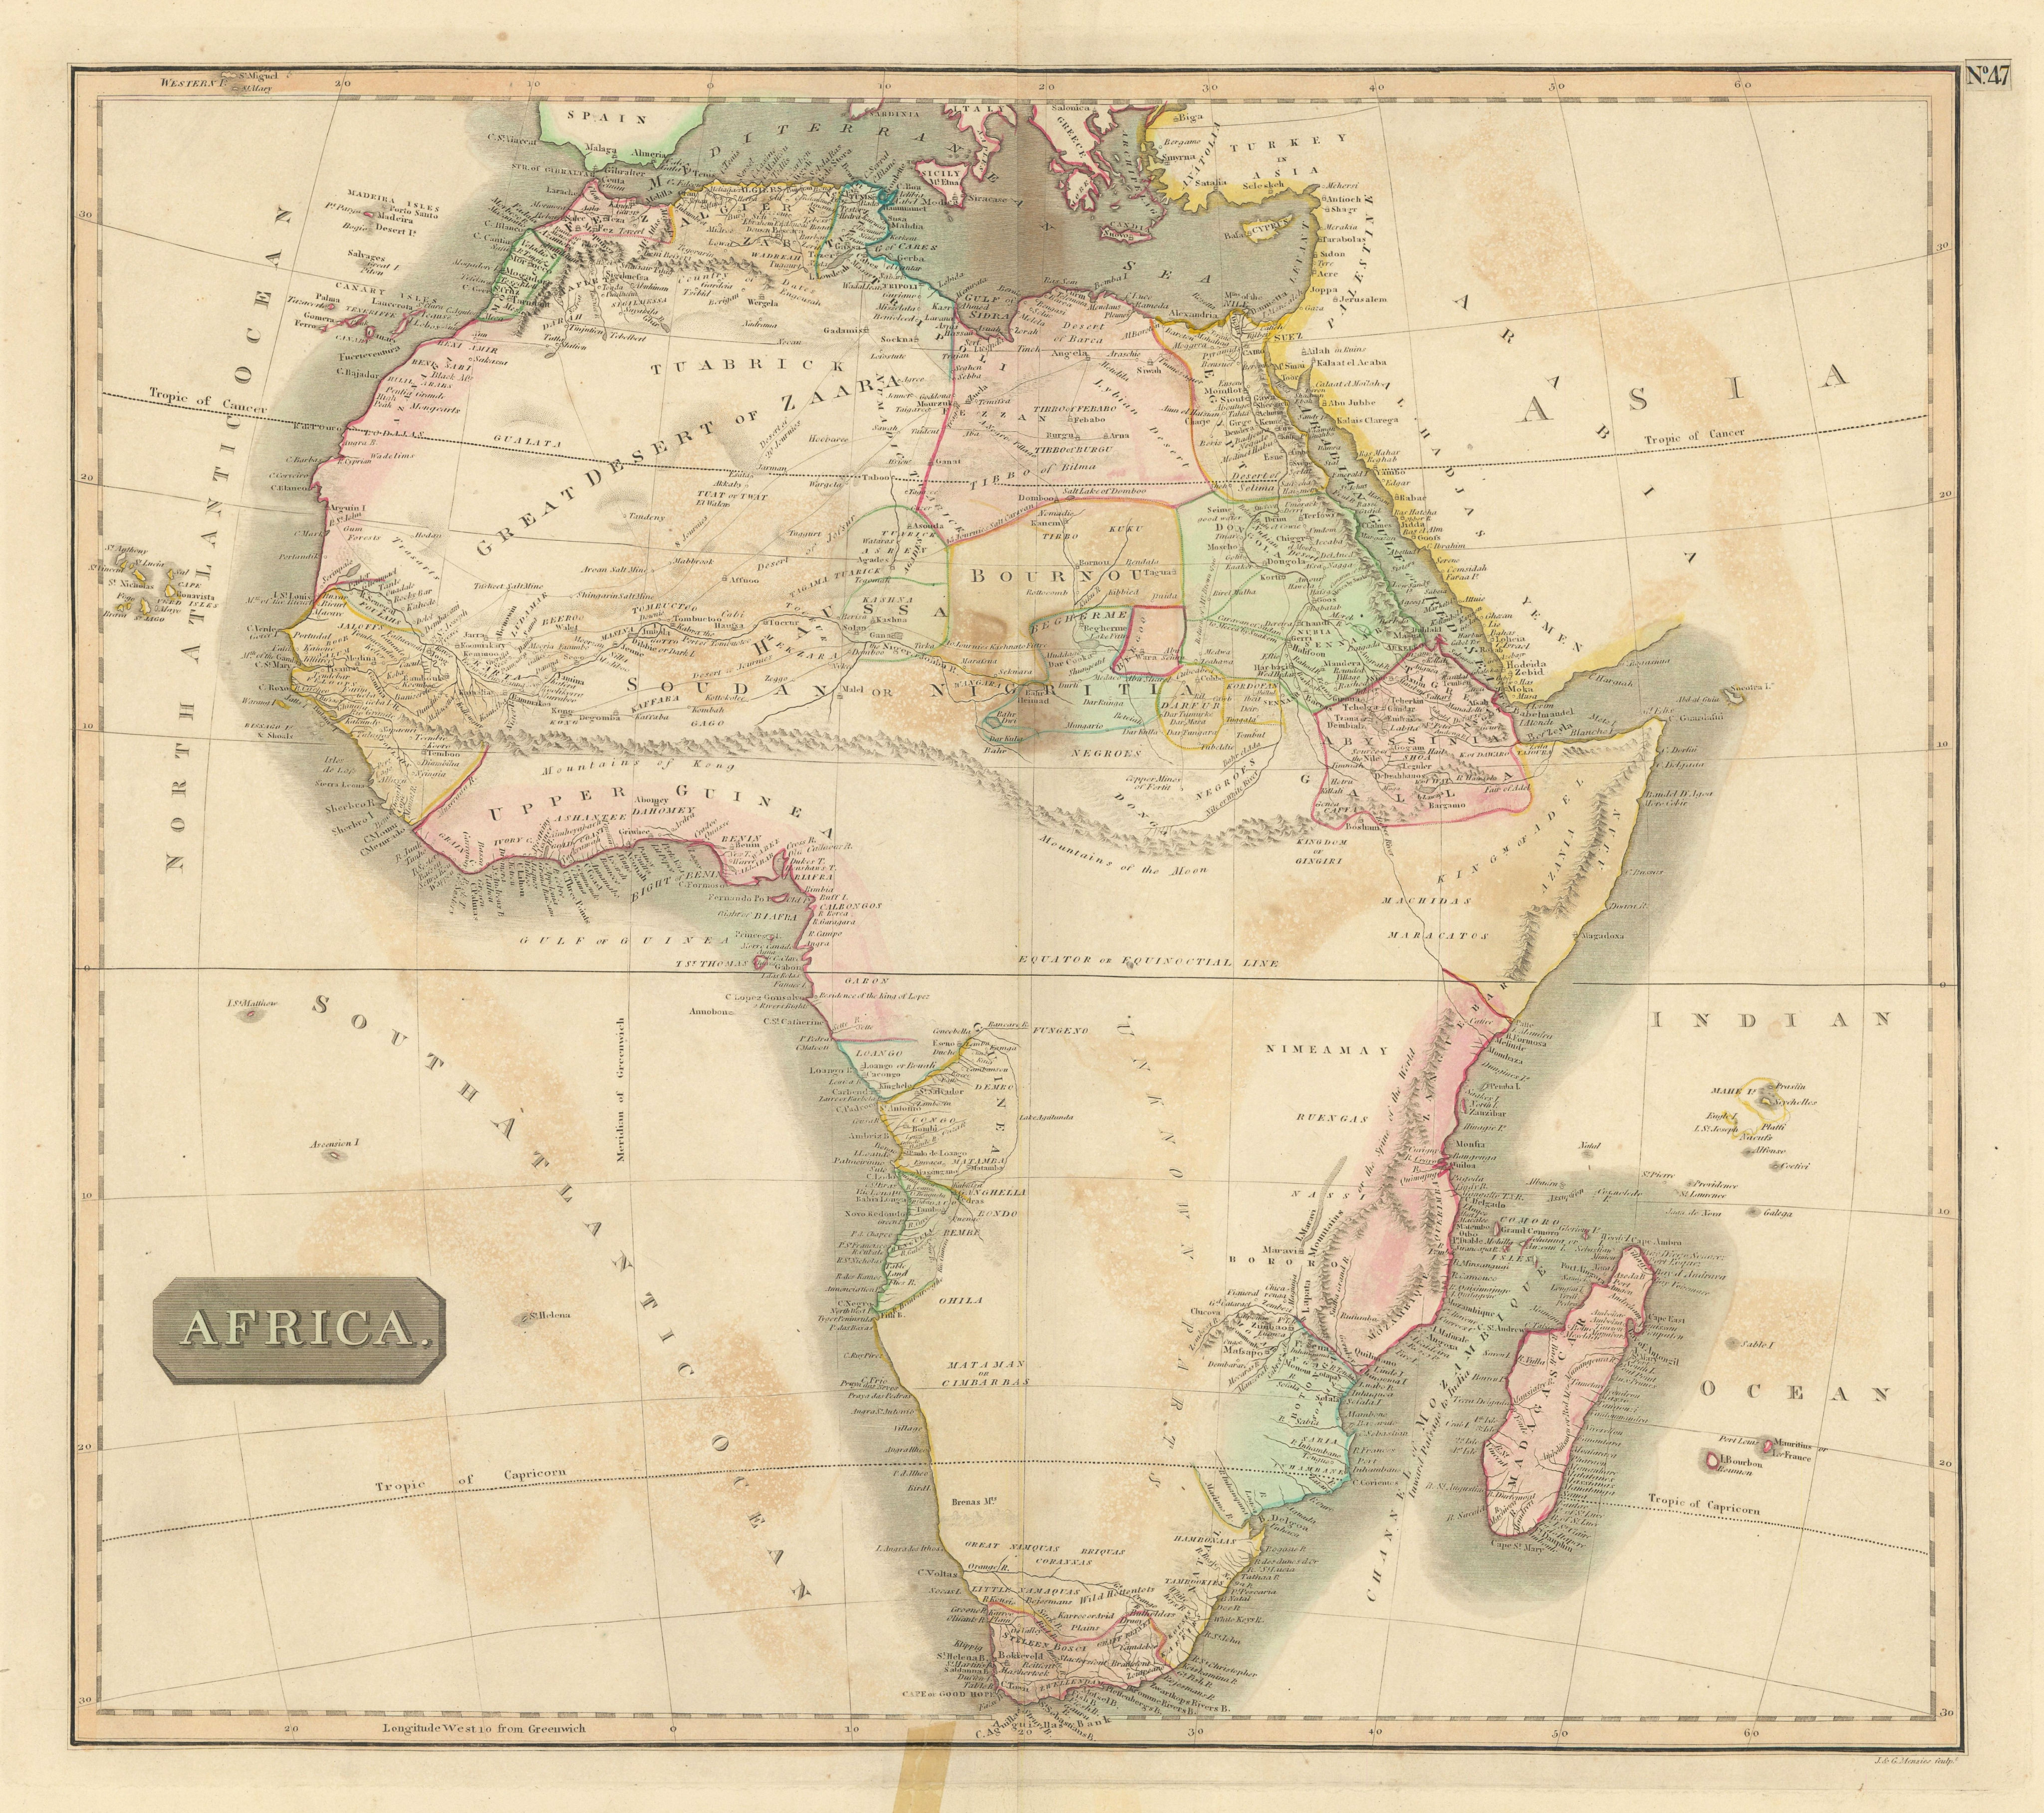 Pre-colonial Africa. Mountains of Kong/Moon. Caravan routes. THOMSON 1817 map